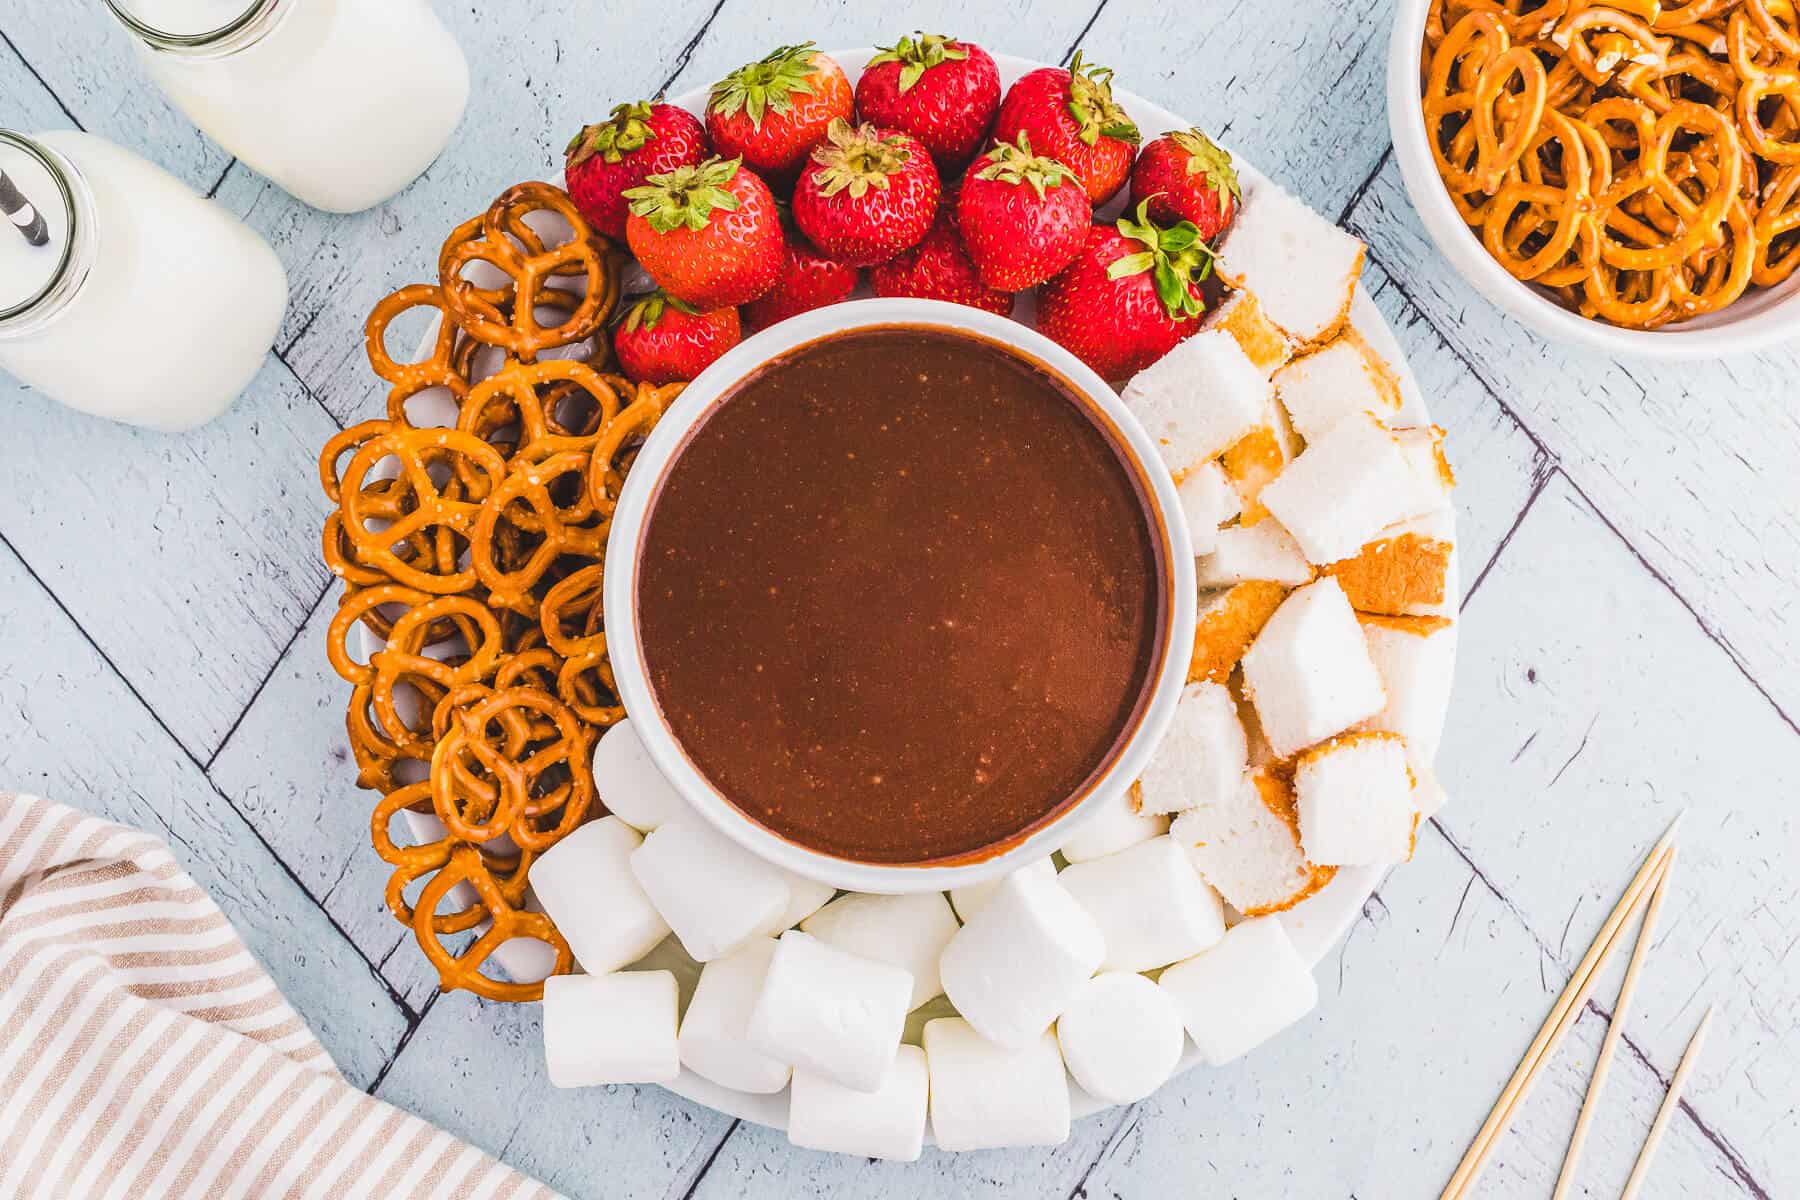 Chocolate Fondue for two